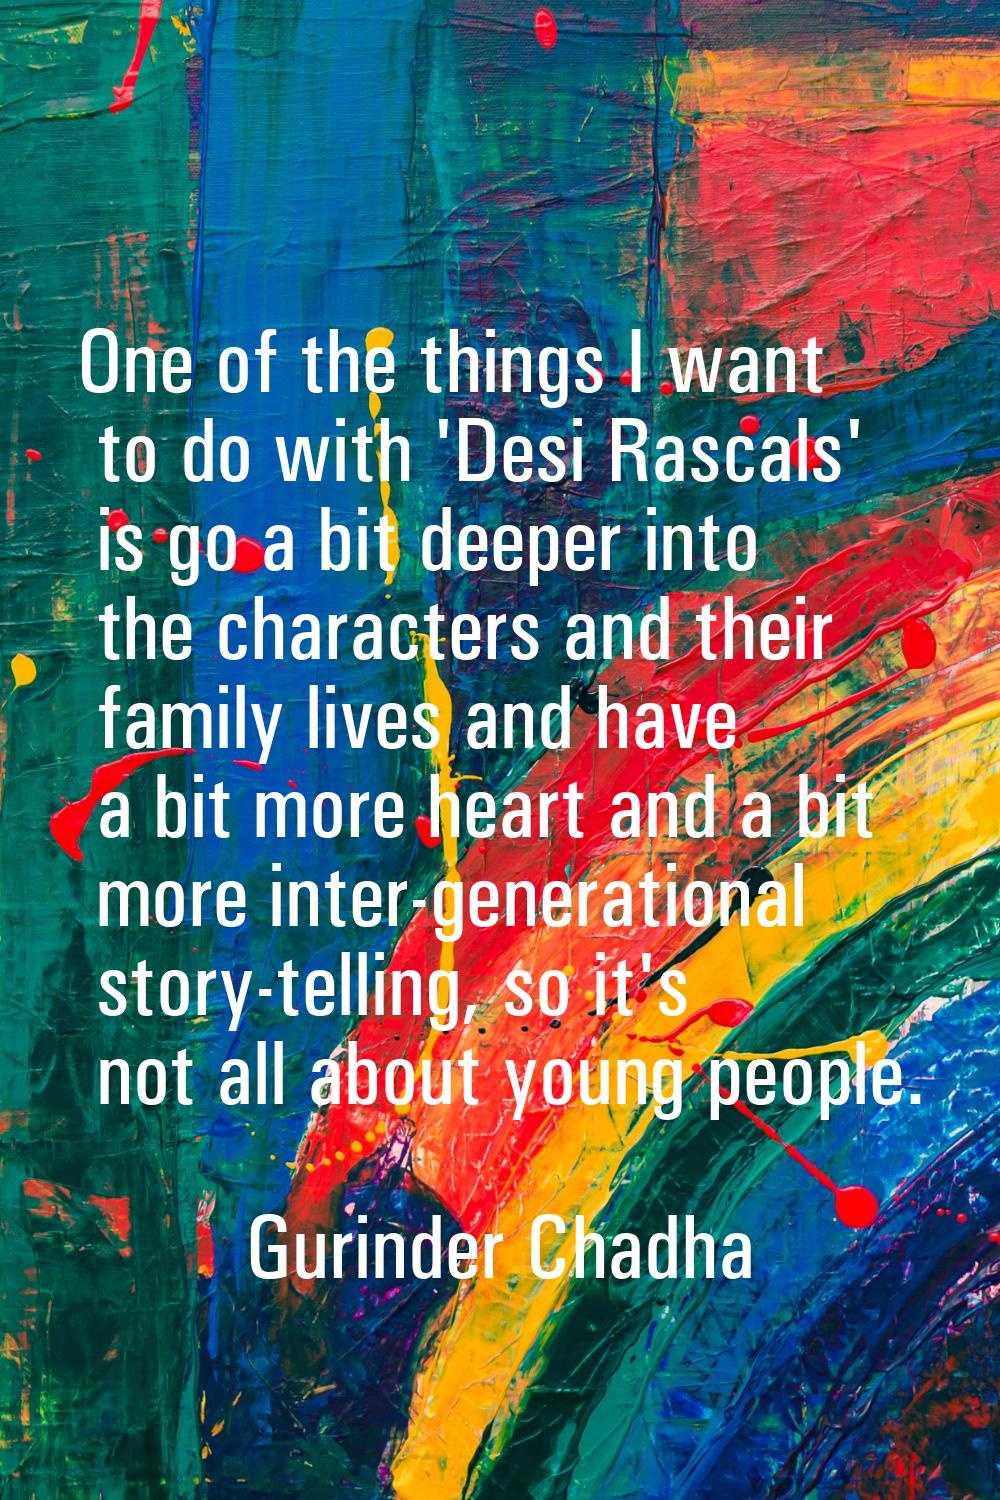 One of the things I want to do with 'Desi Rascals' is go a bit deeper into the characters and their